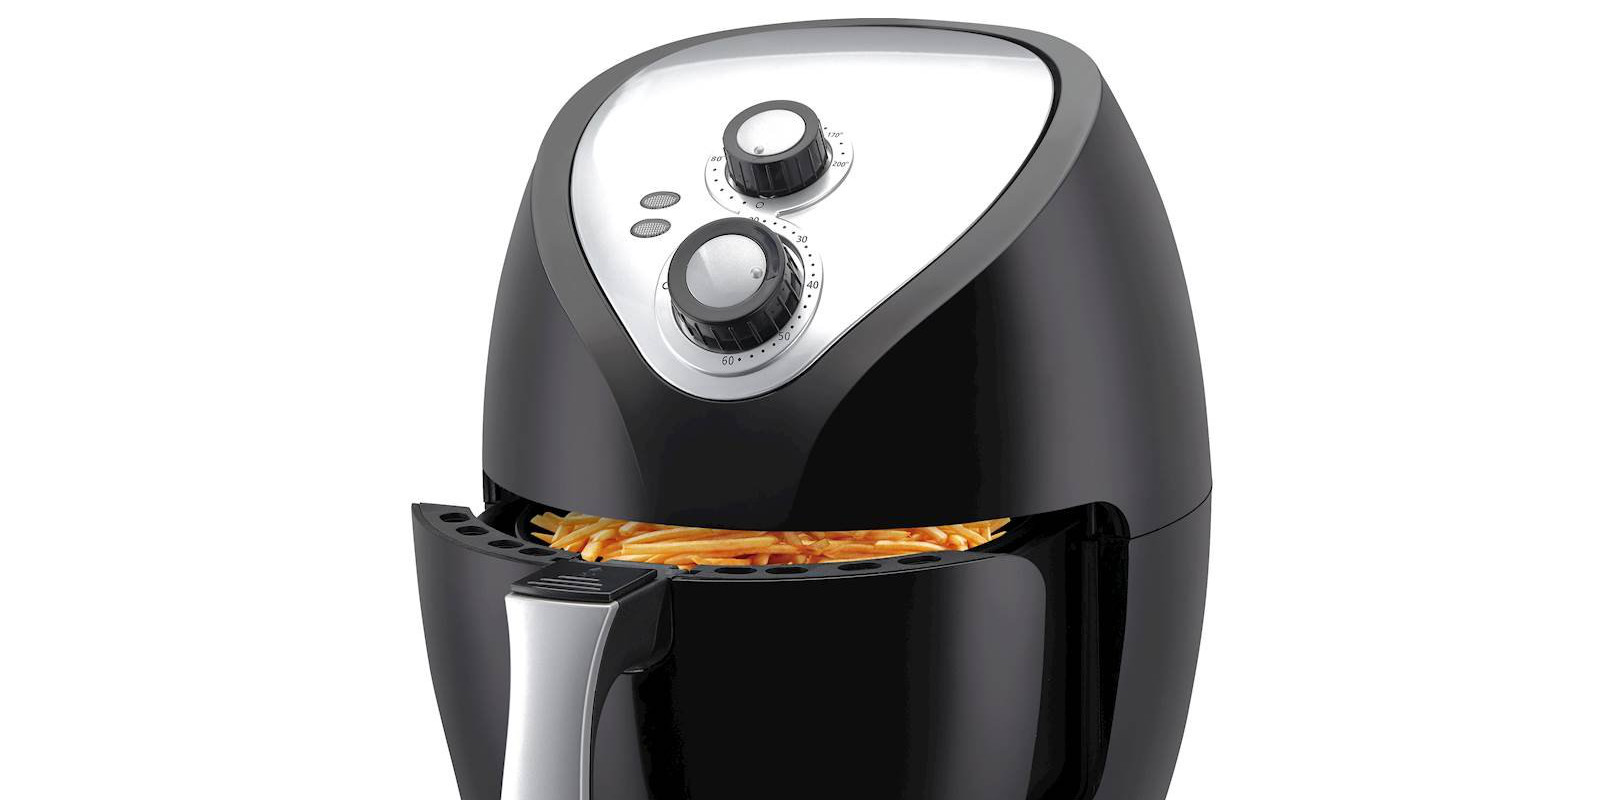 Cook some crispy fries the healthy way: Emerald Air Fryer now $25 (Reg. $60)